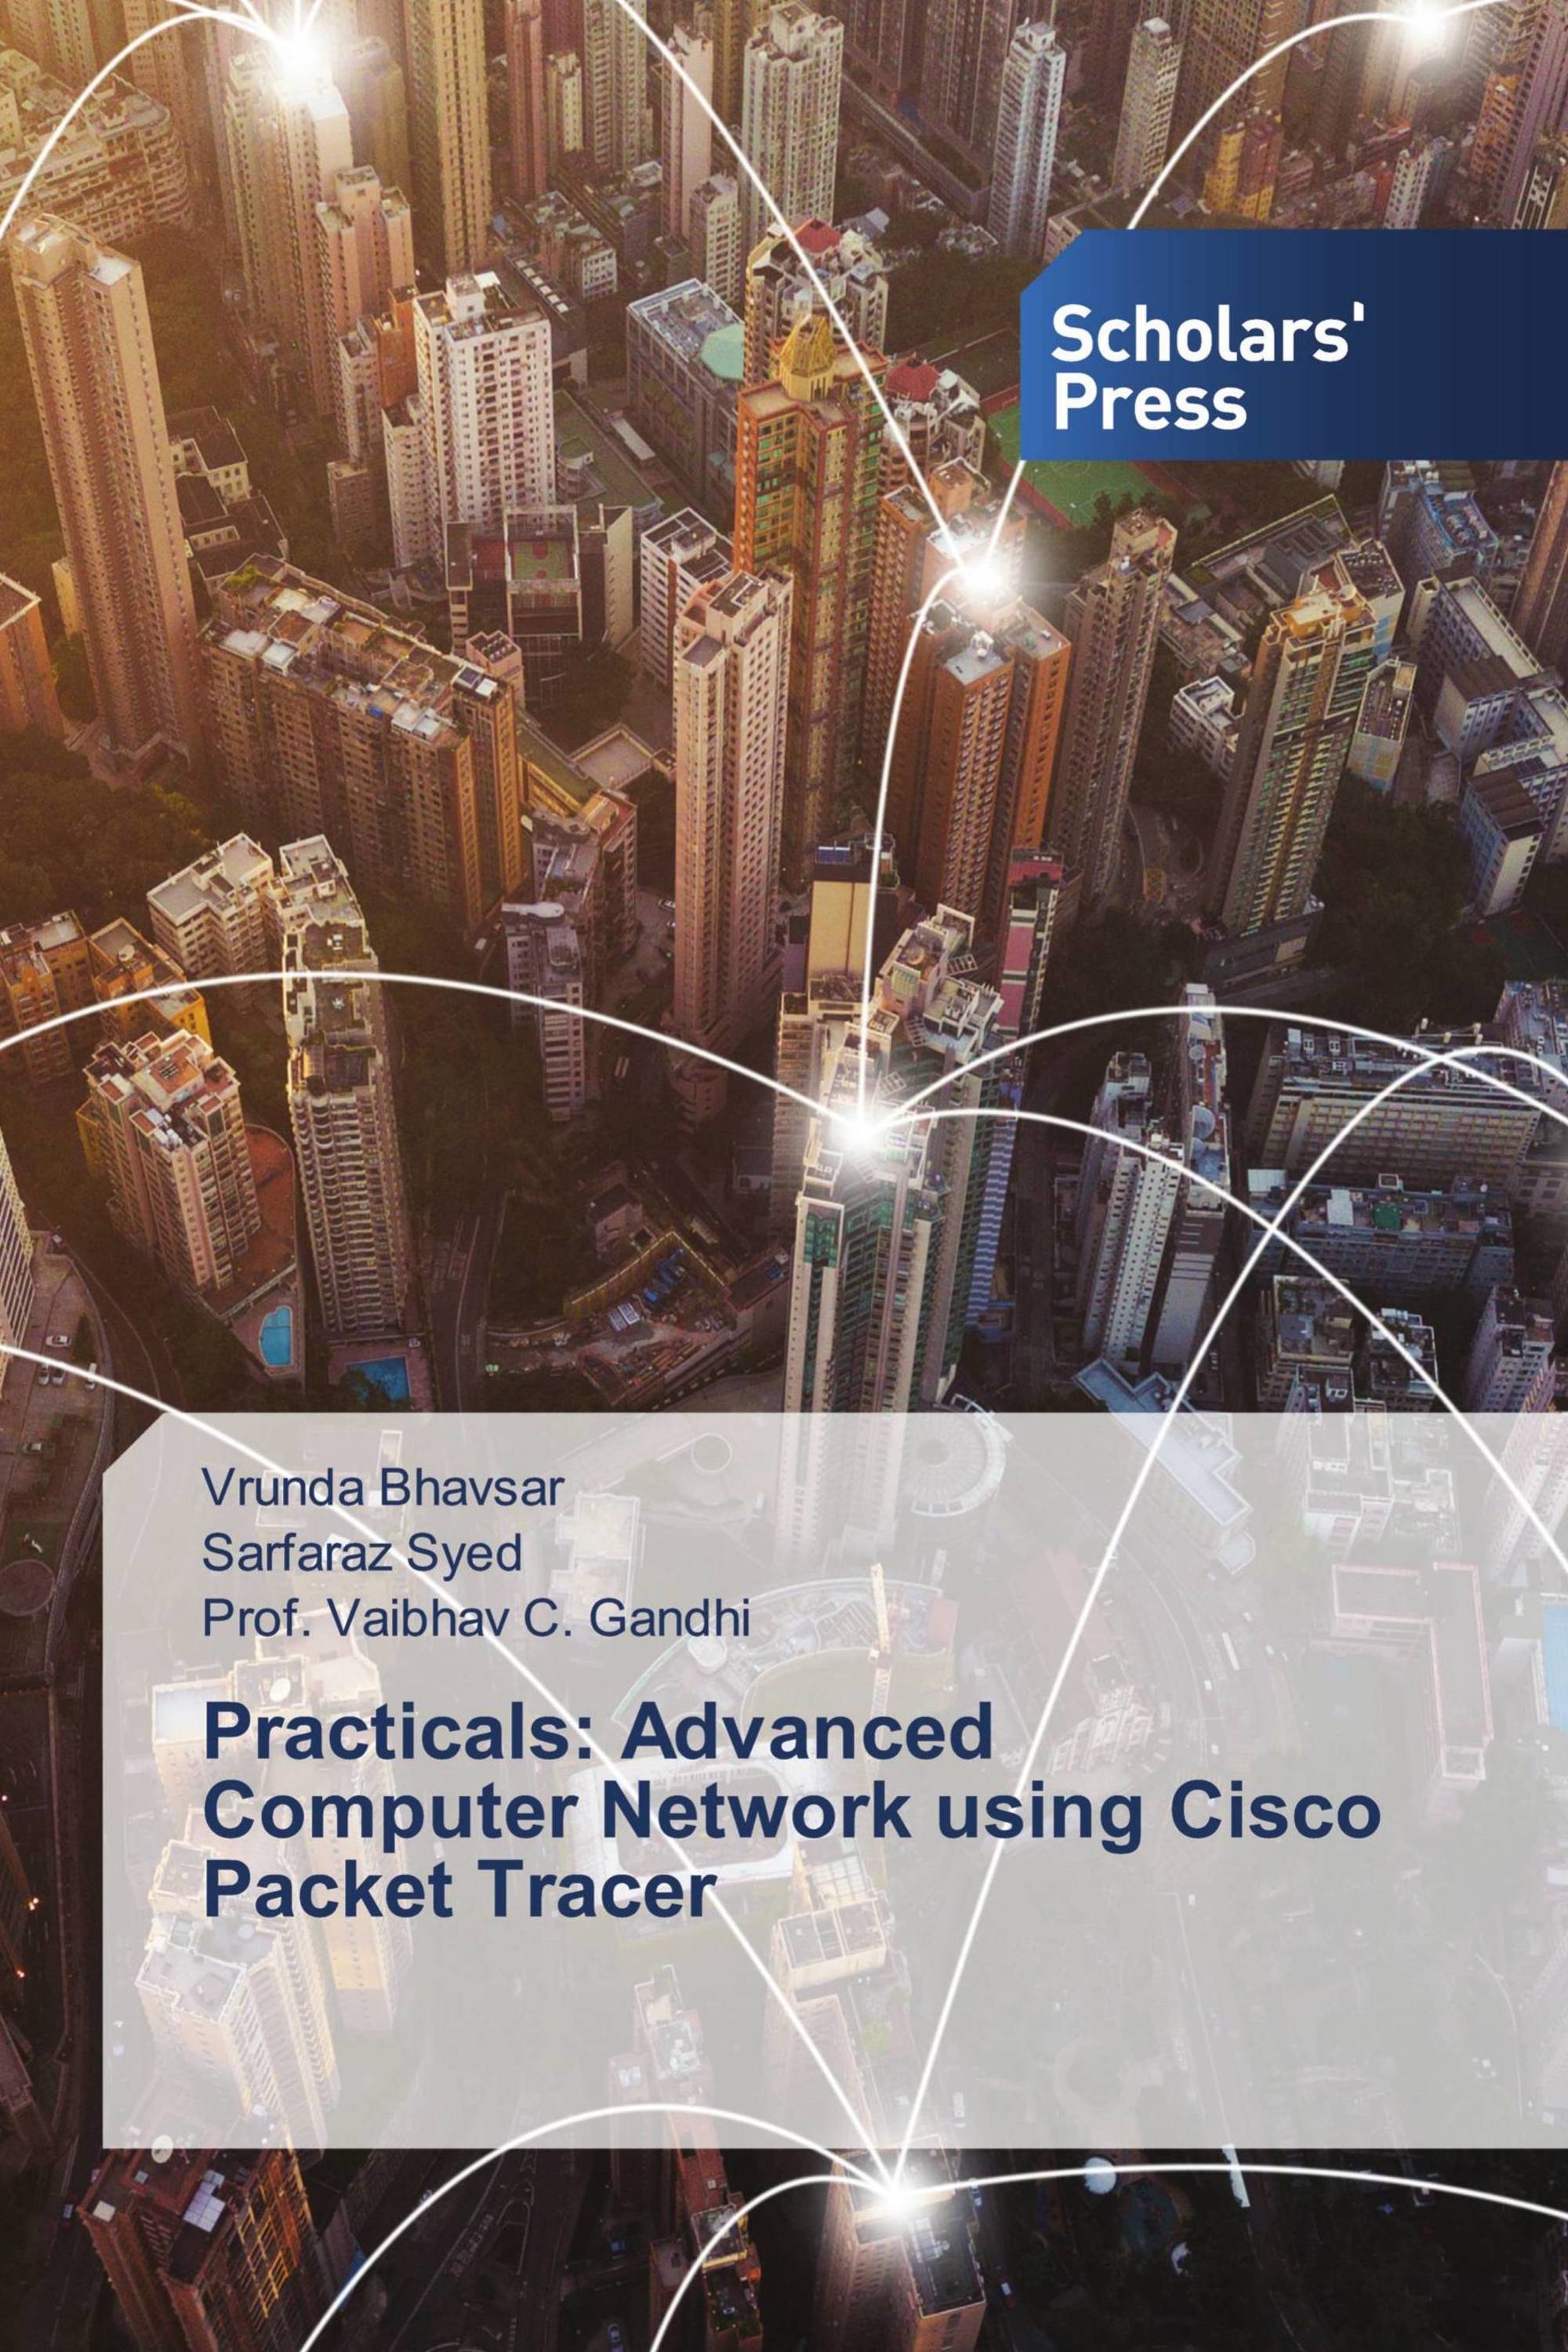 Practicals: Advanced Computer Network using Cisco Packet Tracer